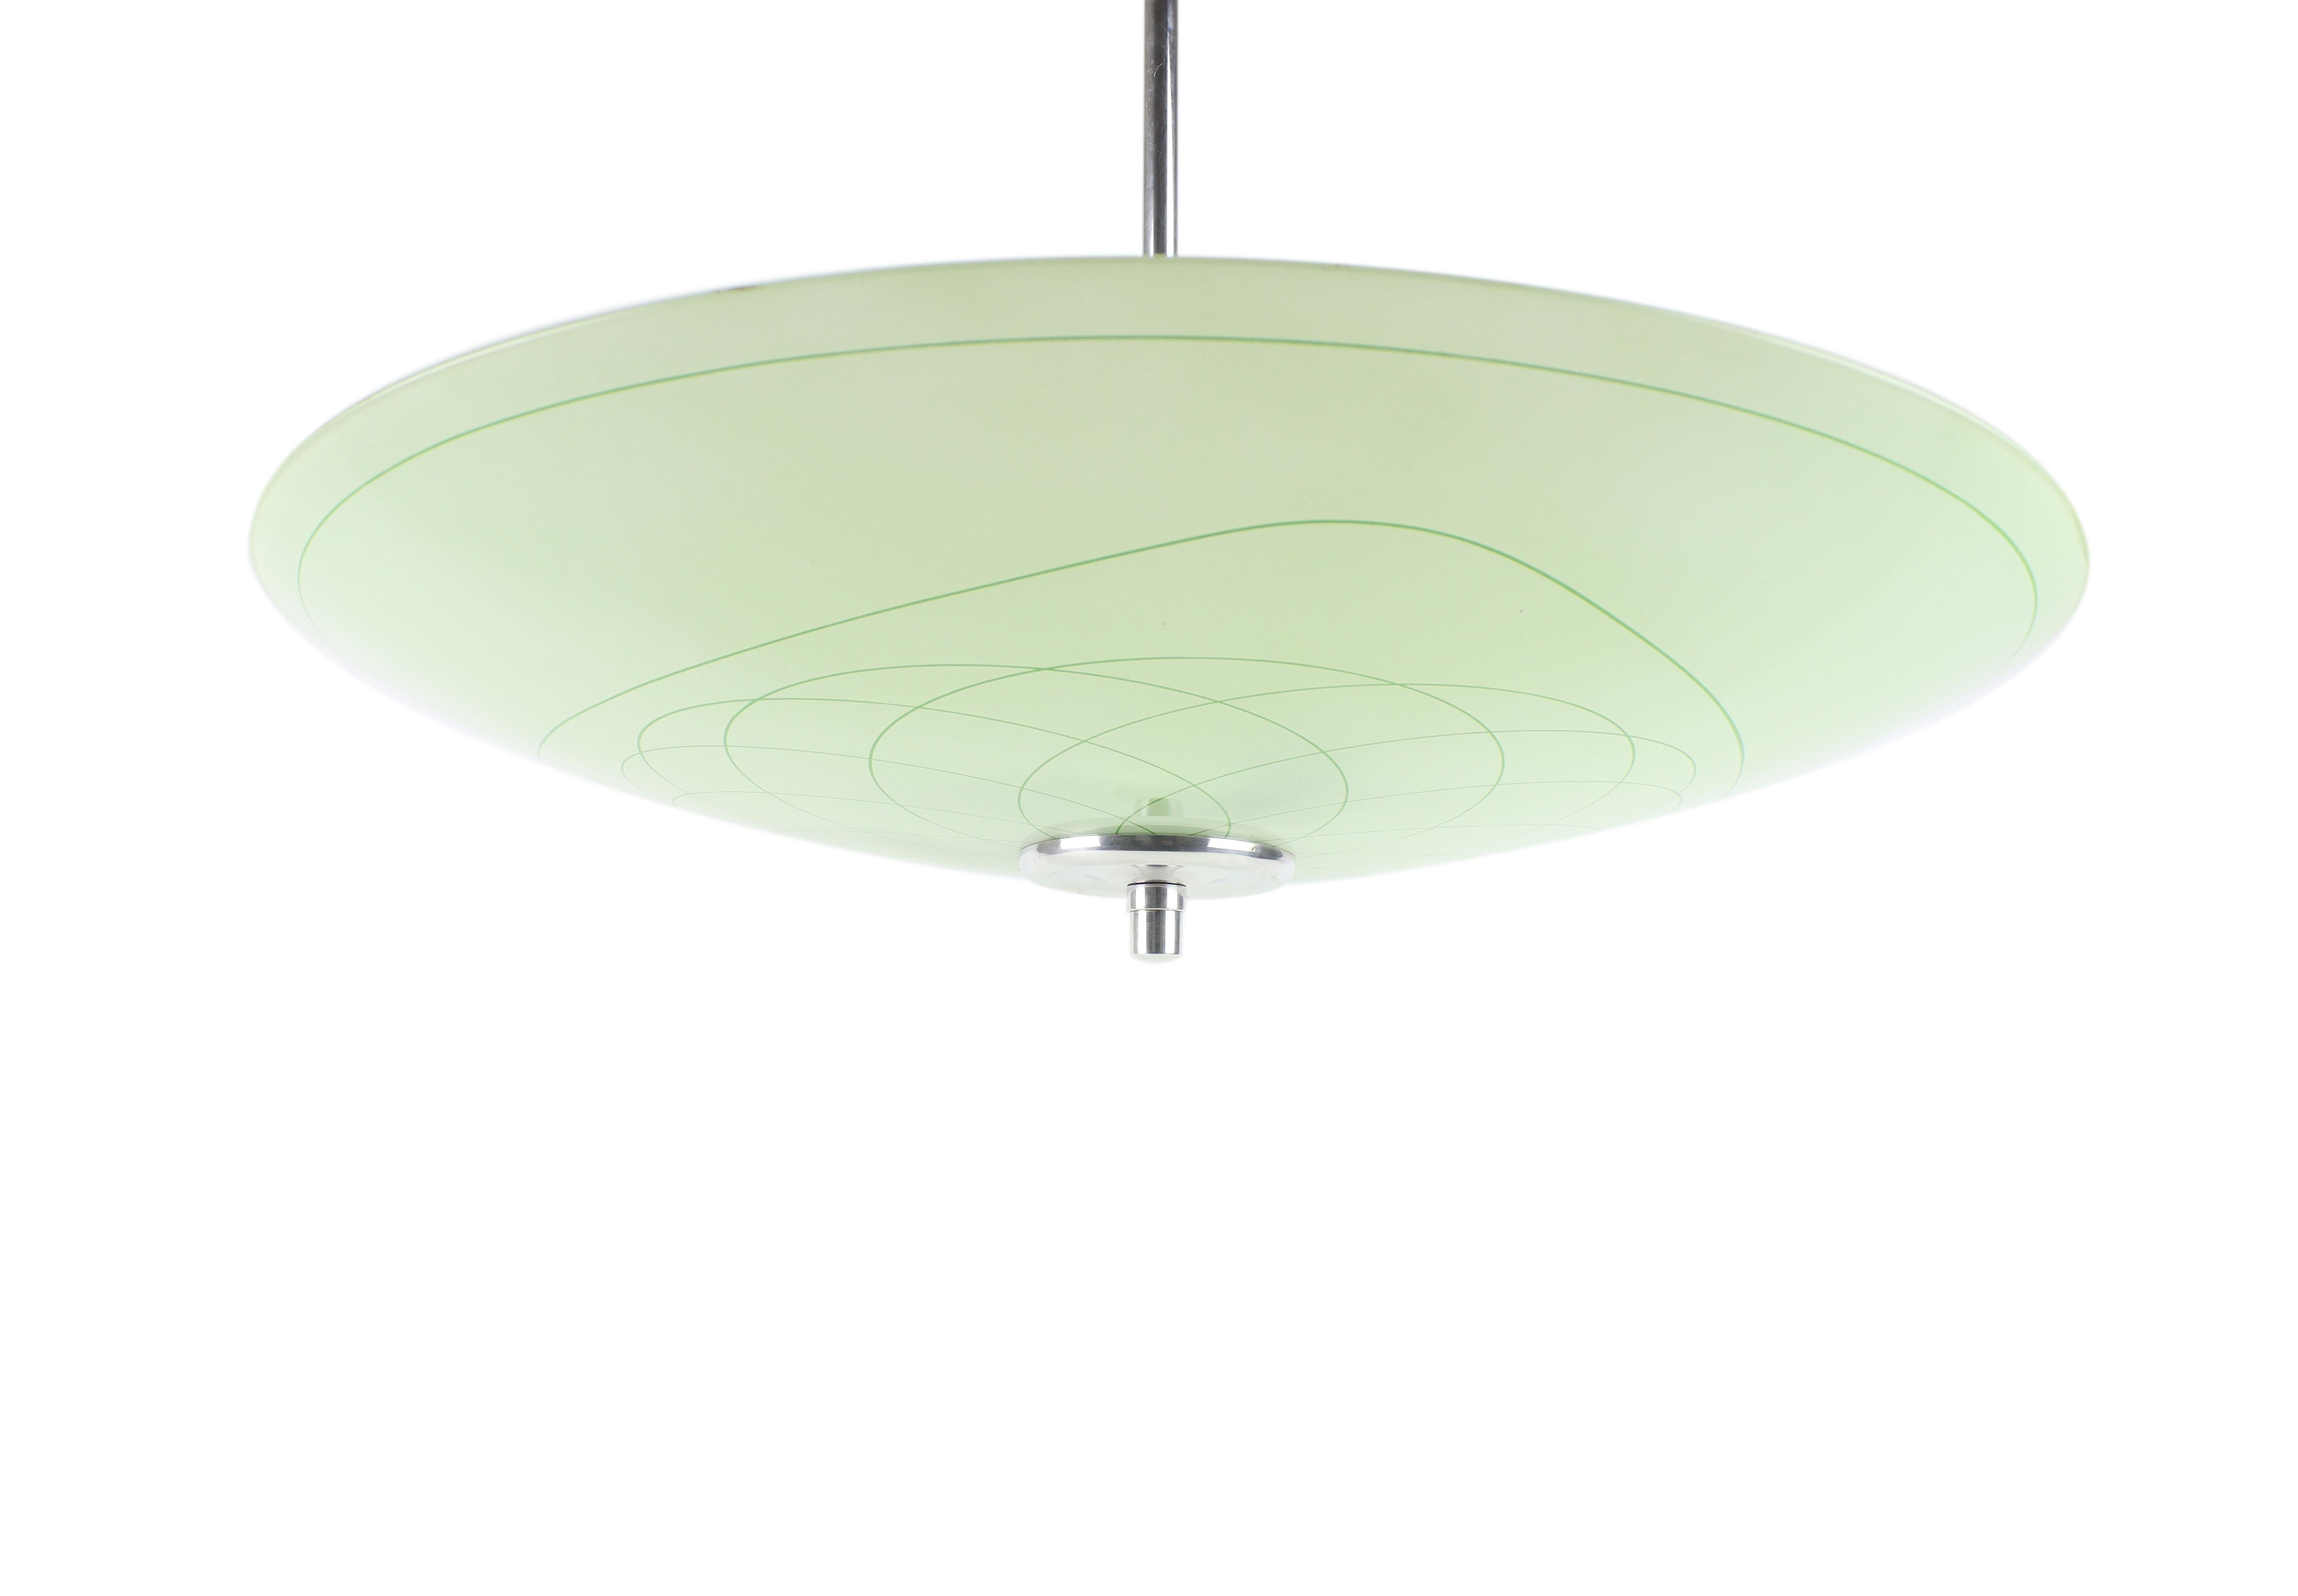 Aluminum Brussels Chandelier with Pea Green Shade